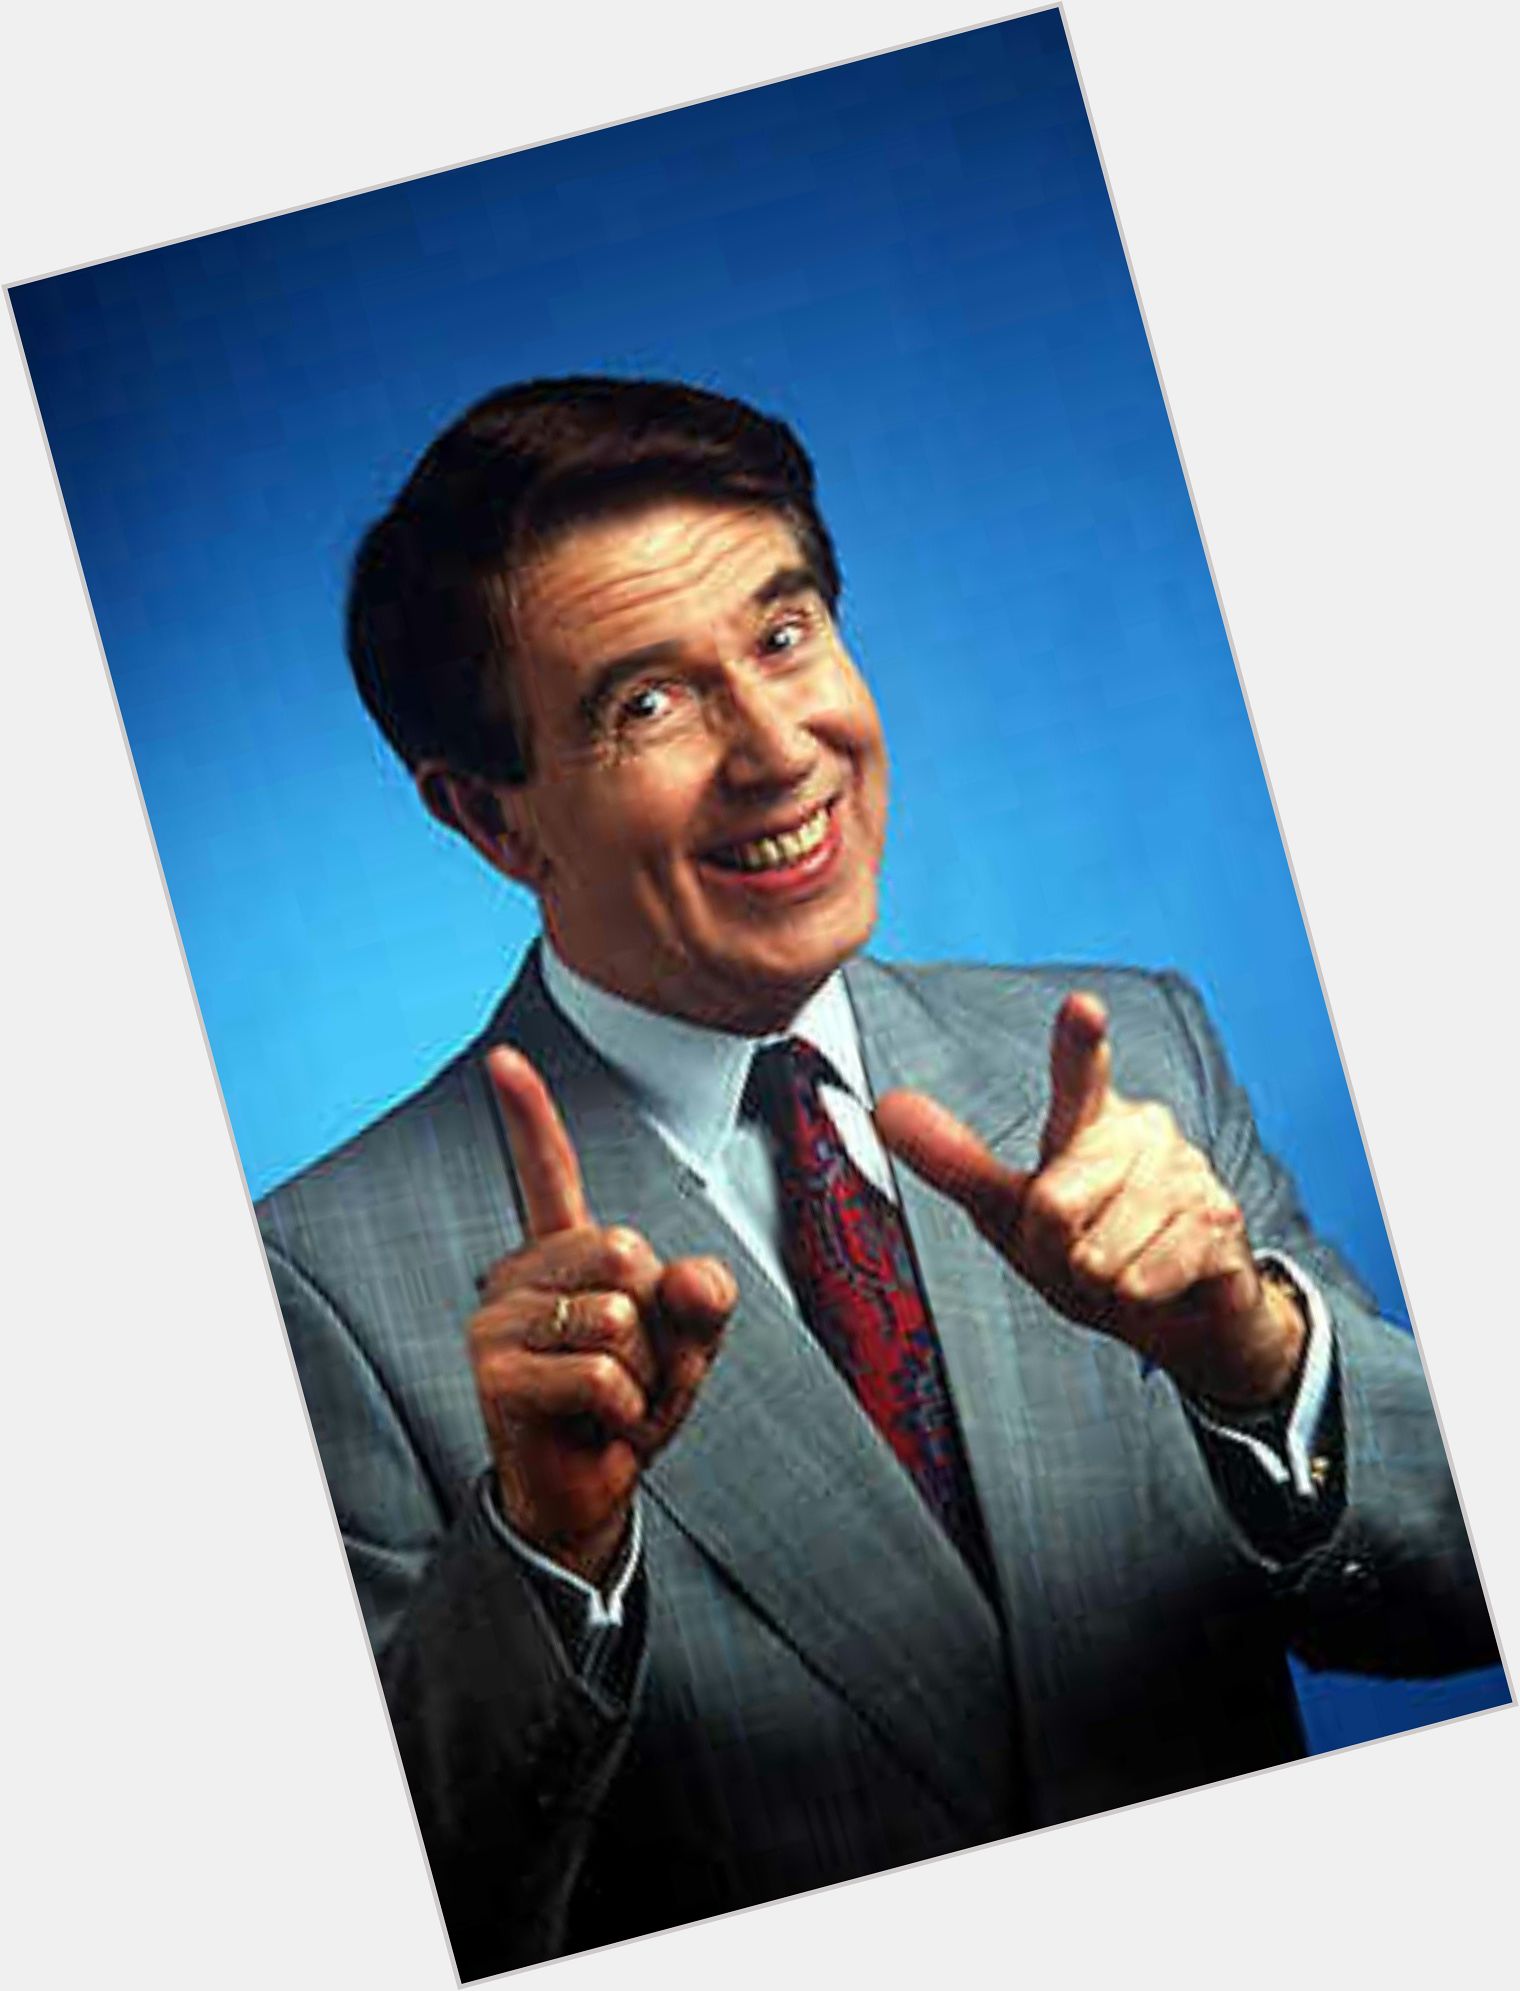 Https://fanpagepress.net/m/L/Leslie Crowther Sexy 0